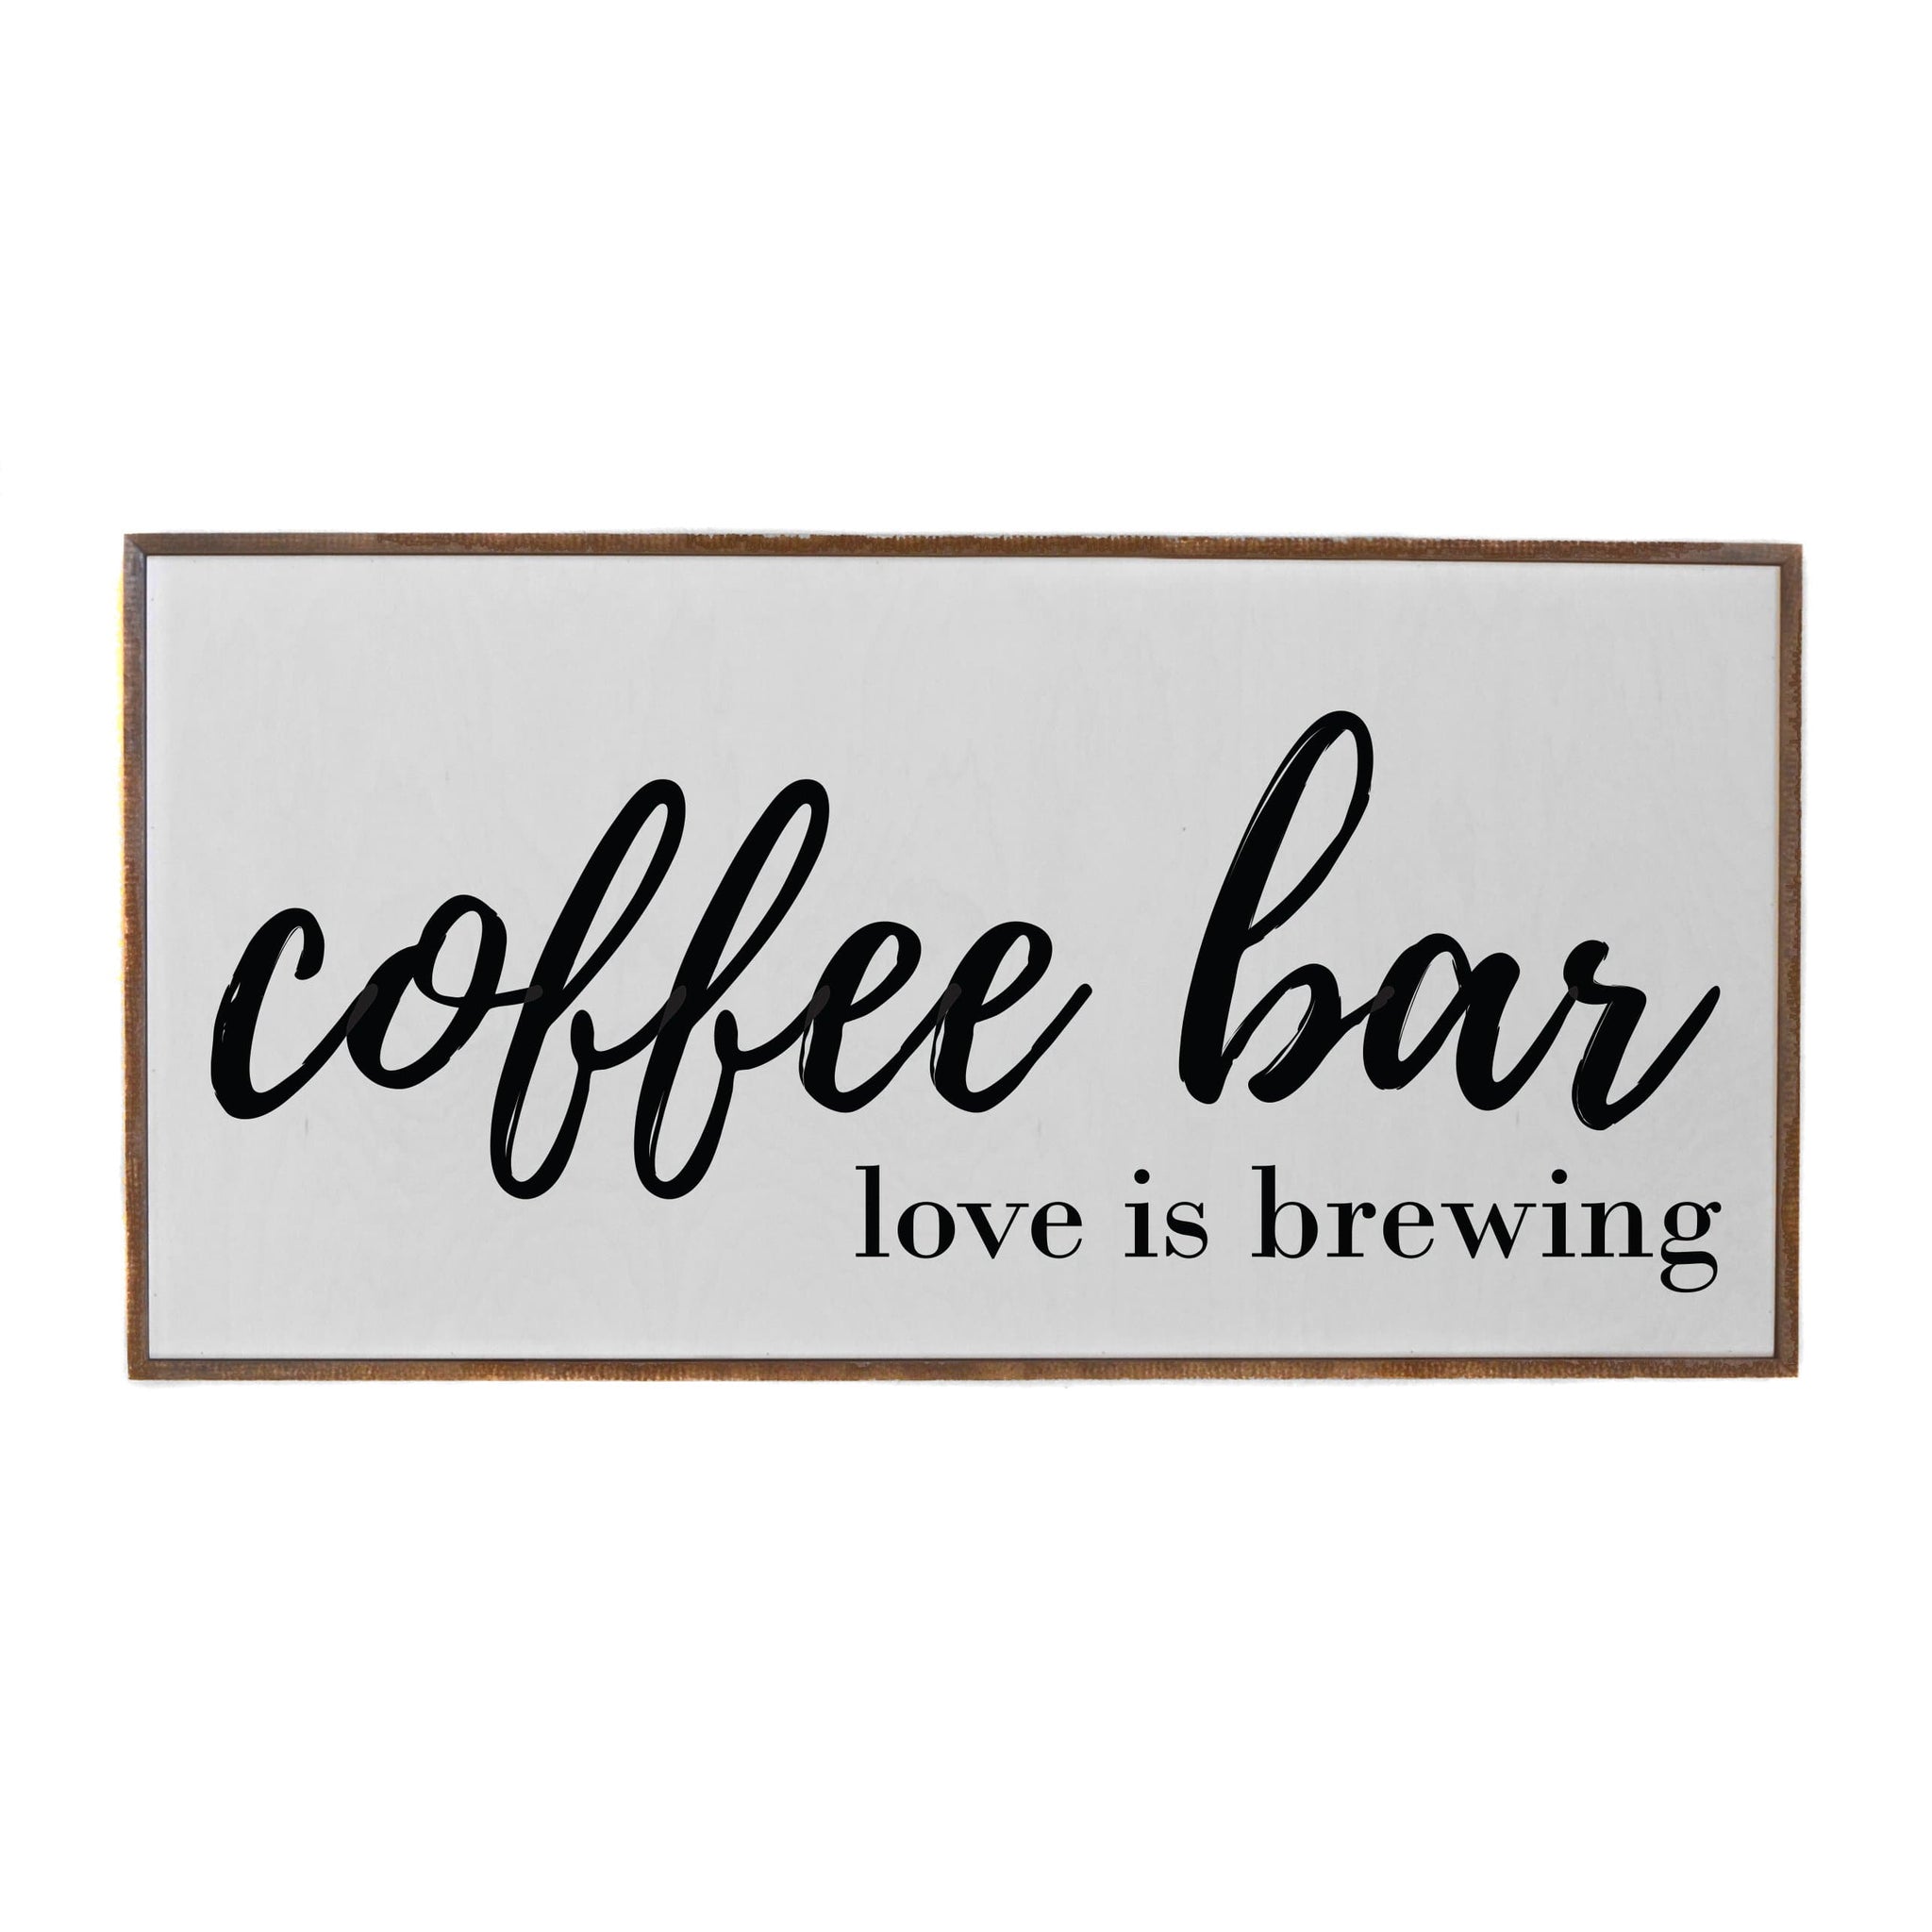 Coffee Bar Love is Brewing SIGN, Coffee Bar SIGN, Gift, PREORDER 